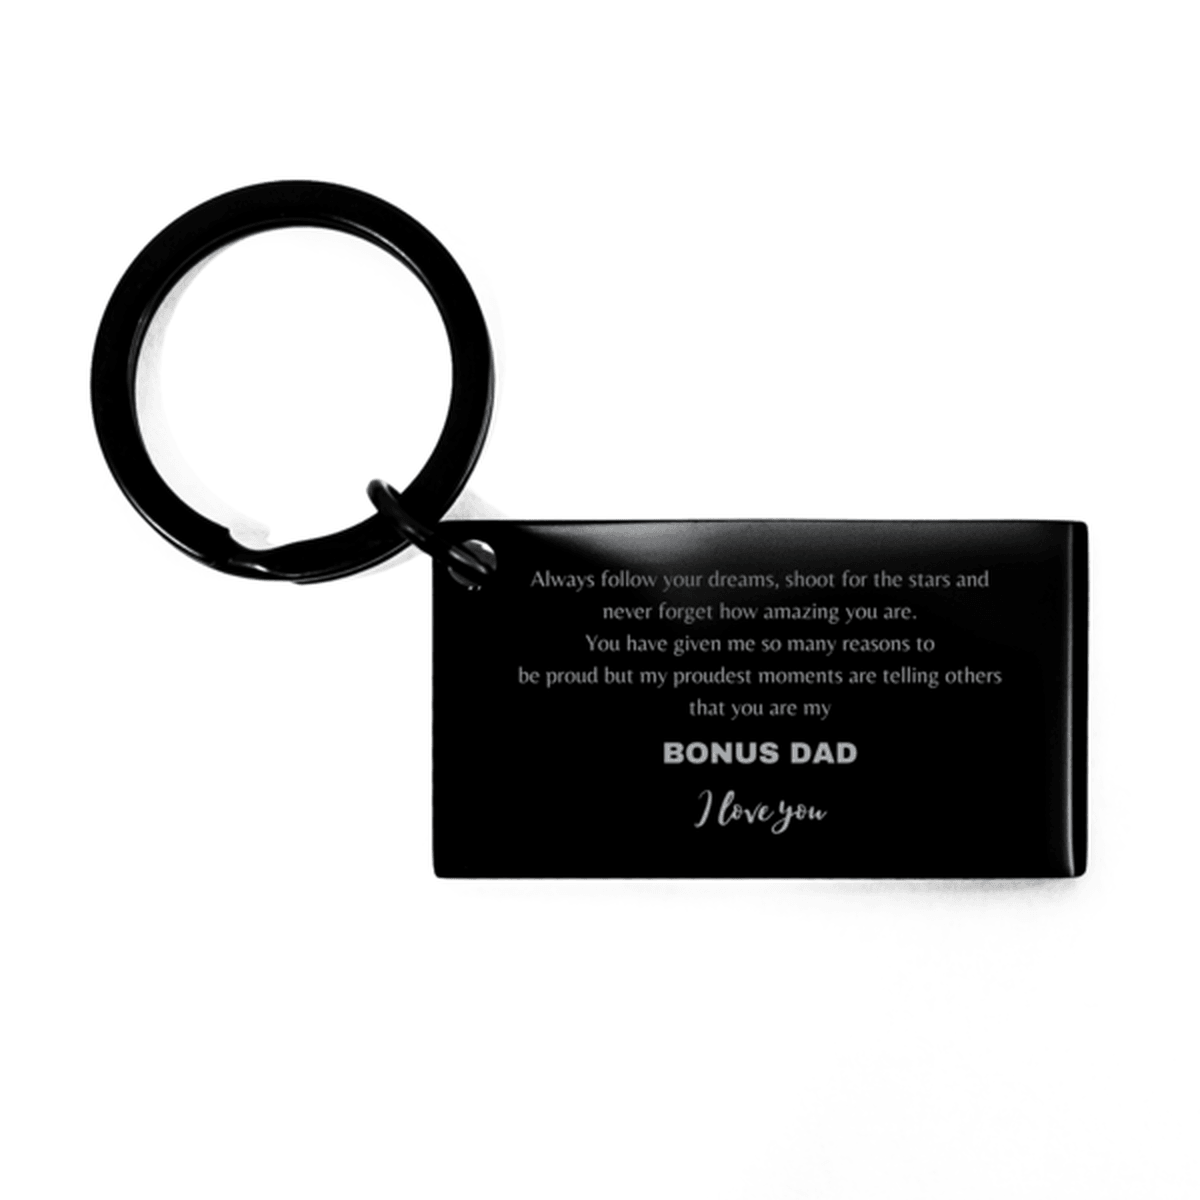 Bonus Dad Black Engraved Keychain Always follow your dreams, never forget how amazing you are, Birthday Christmas Gifts Jewelry - Mallard Moon Gift Shop